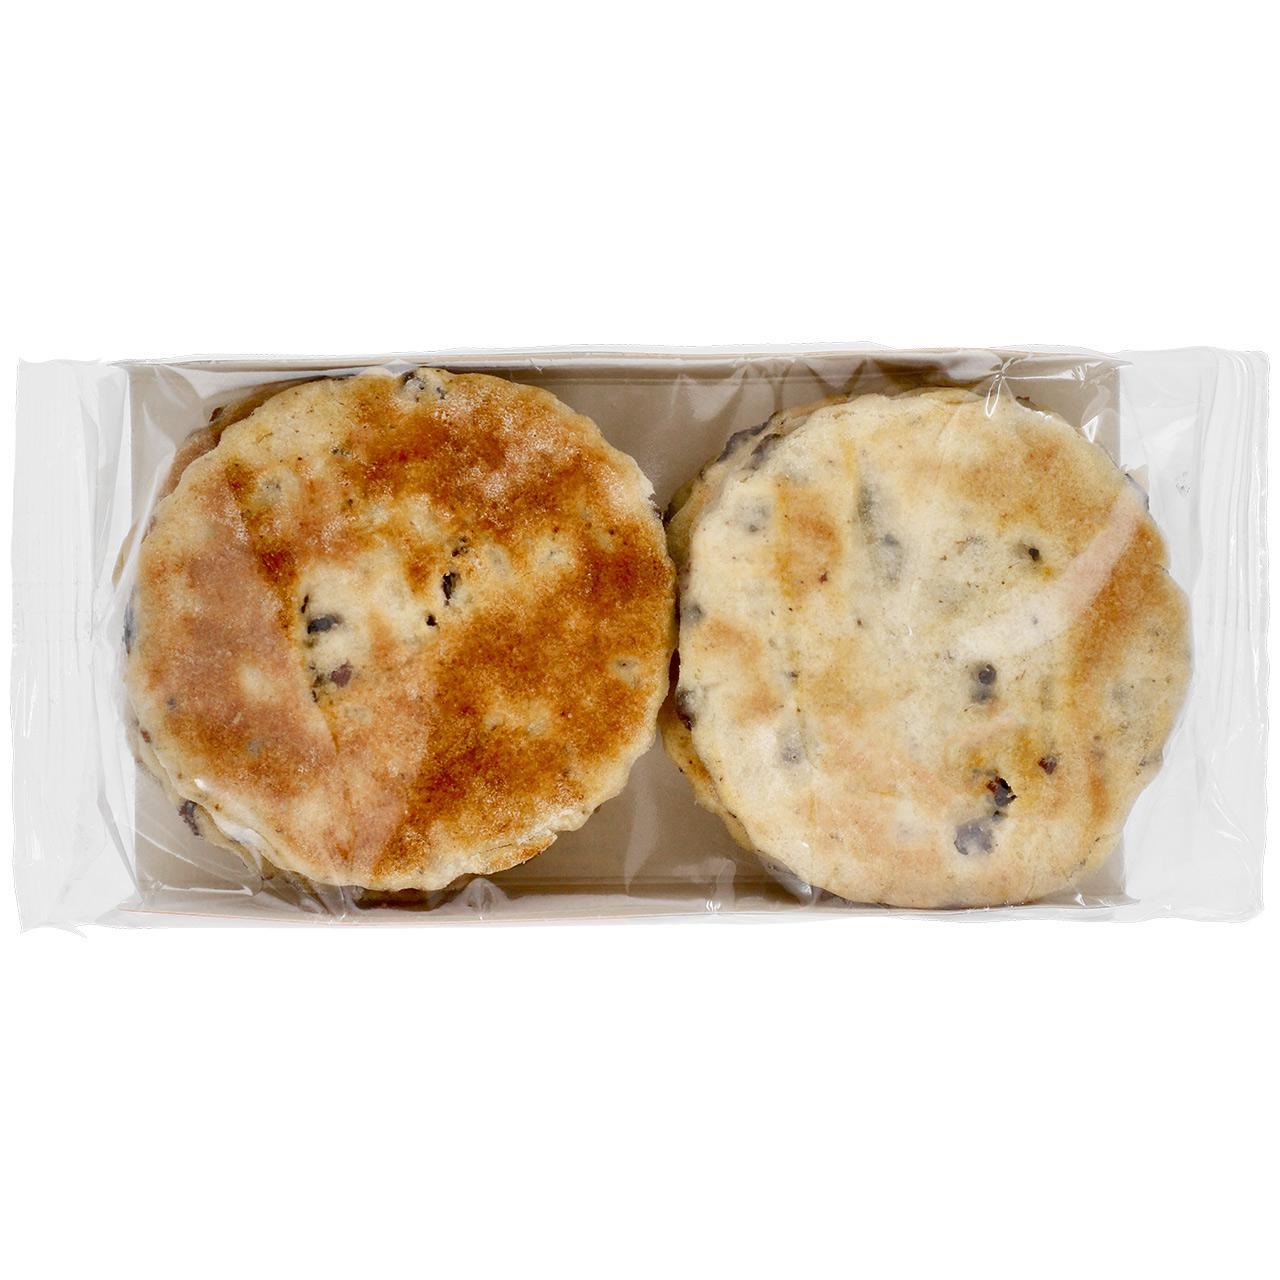 M&S Welsh Cakes 6 per pack